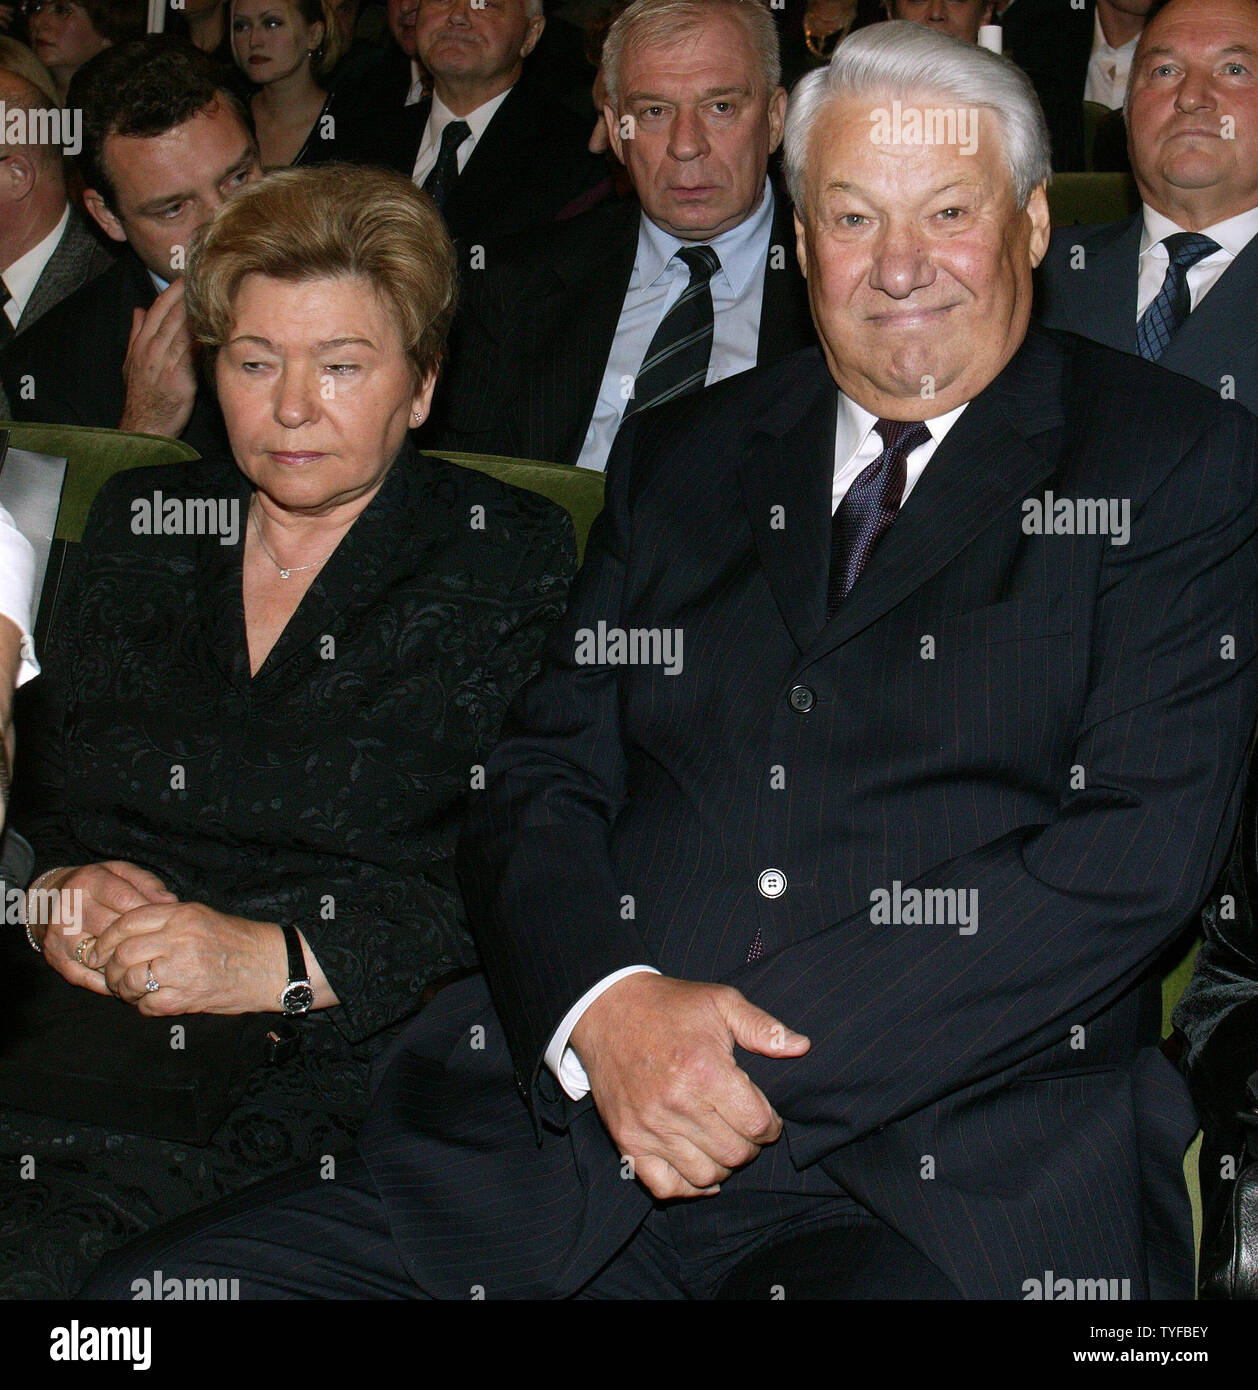 Former Russian President Boris Yeltsin, shown in this 2000 file photo, died at the age of 76 on April 23, 2007 in Moscow. Yeltsin pushed Russia to democracy and a market economy after helping in the collapse of the Soviet Union communist state in 1991. In this file photo, Former Russian President Boris Yeltsin with his wife Naina attends a celebration of Lencom theater in Moscow on October 24, 2003. (UPI Photo/Anatoli Zhdanov) Stock Photo